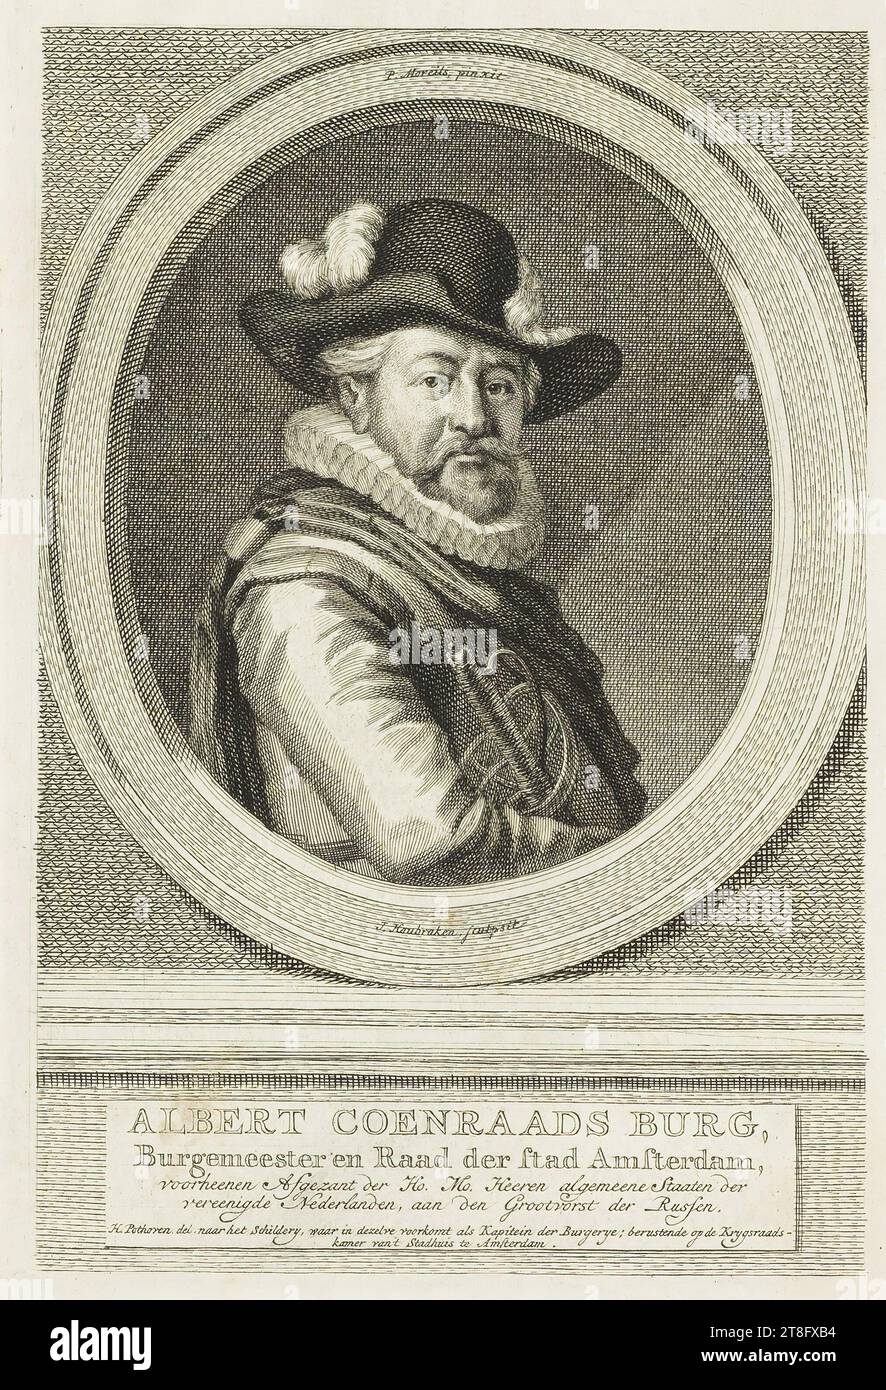 J. Houbraken Sculpsit. ALBERT COENRAADS BURG, Mayor and Council of the City of Amsterdam, formerly Emissary of the Ho. Mo. Lords General States of the United Netherlands, to the Grand Prince of Russia. H. Pothoven del, after the Painting, in which he appears as Captain of the Burgery, kept in the Council Chamber of the City Hall in Amsterdam Stock Photo